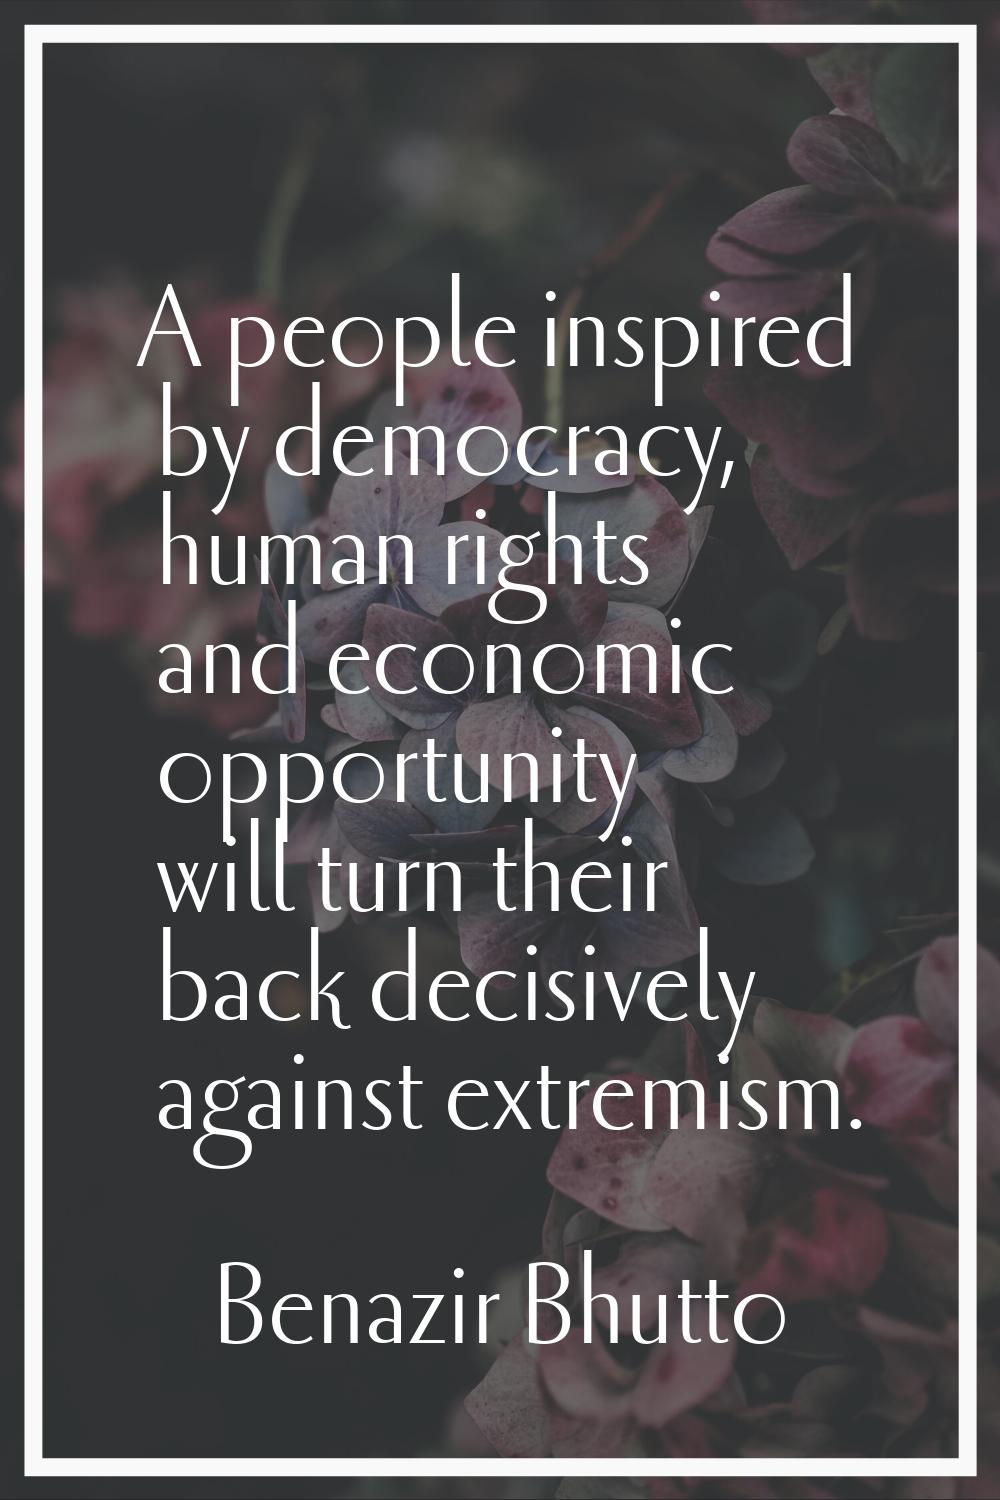 A people inspired by democracy, human rights and economic opportunity will turn their back decisive